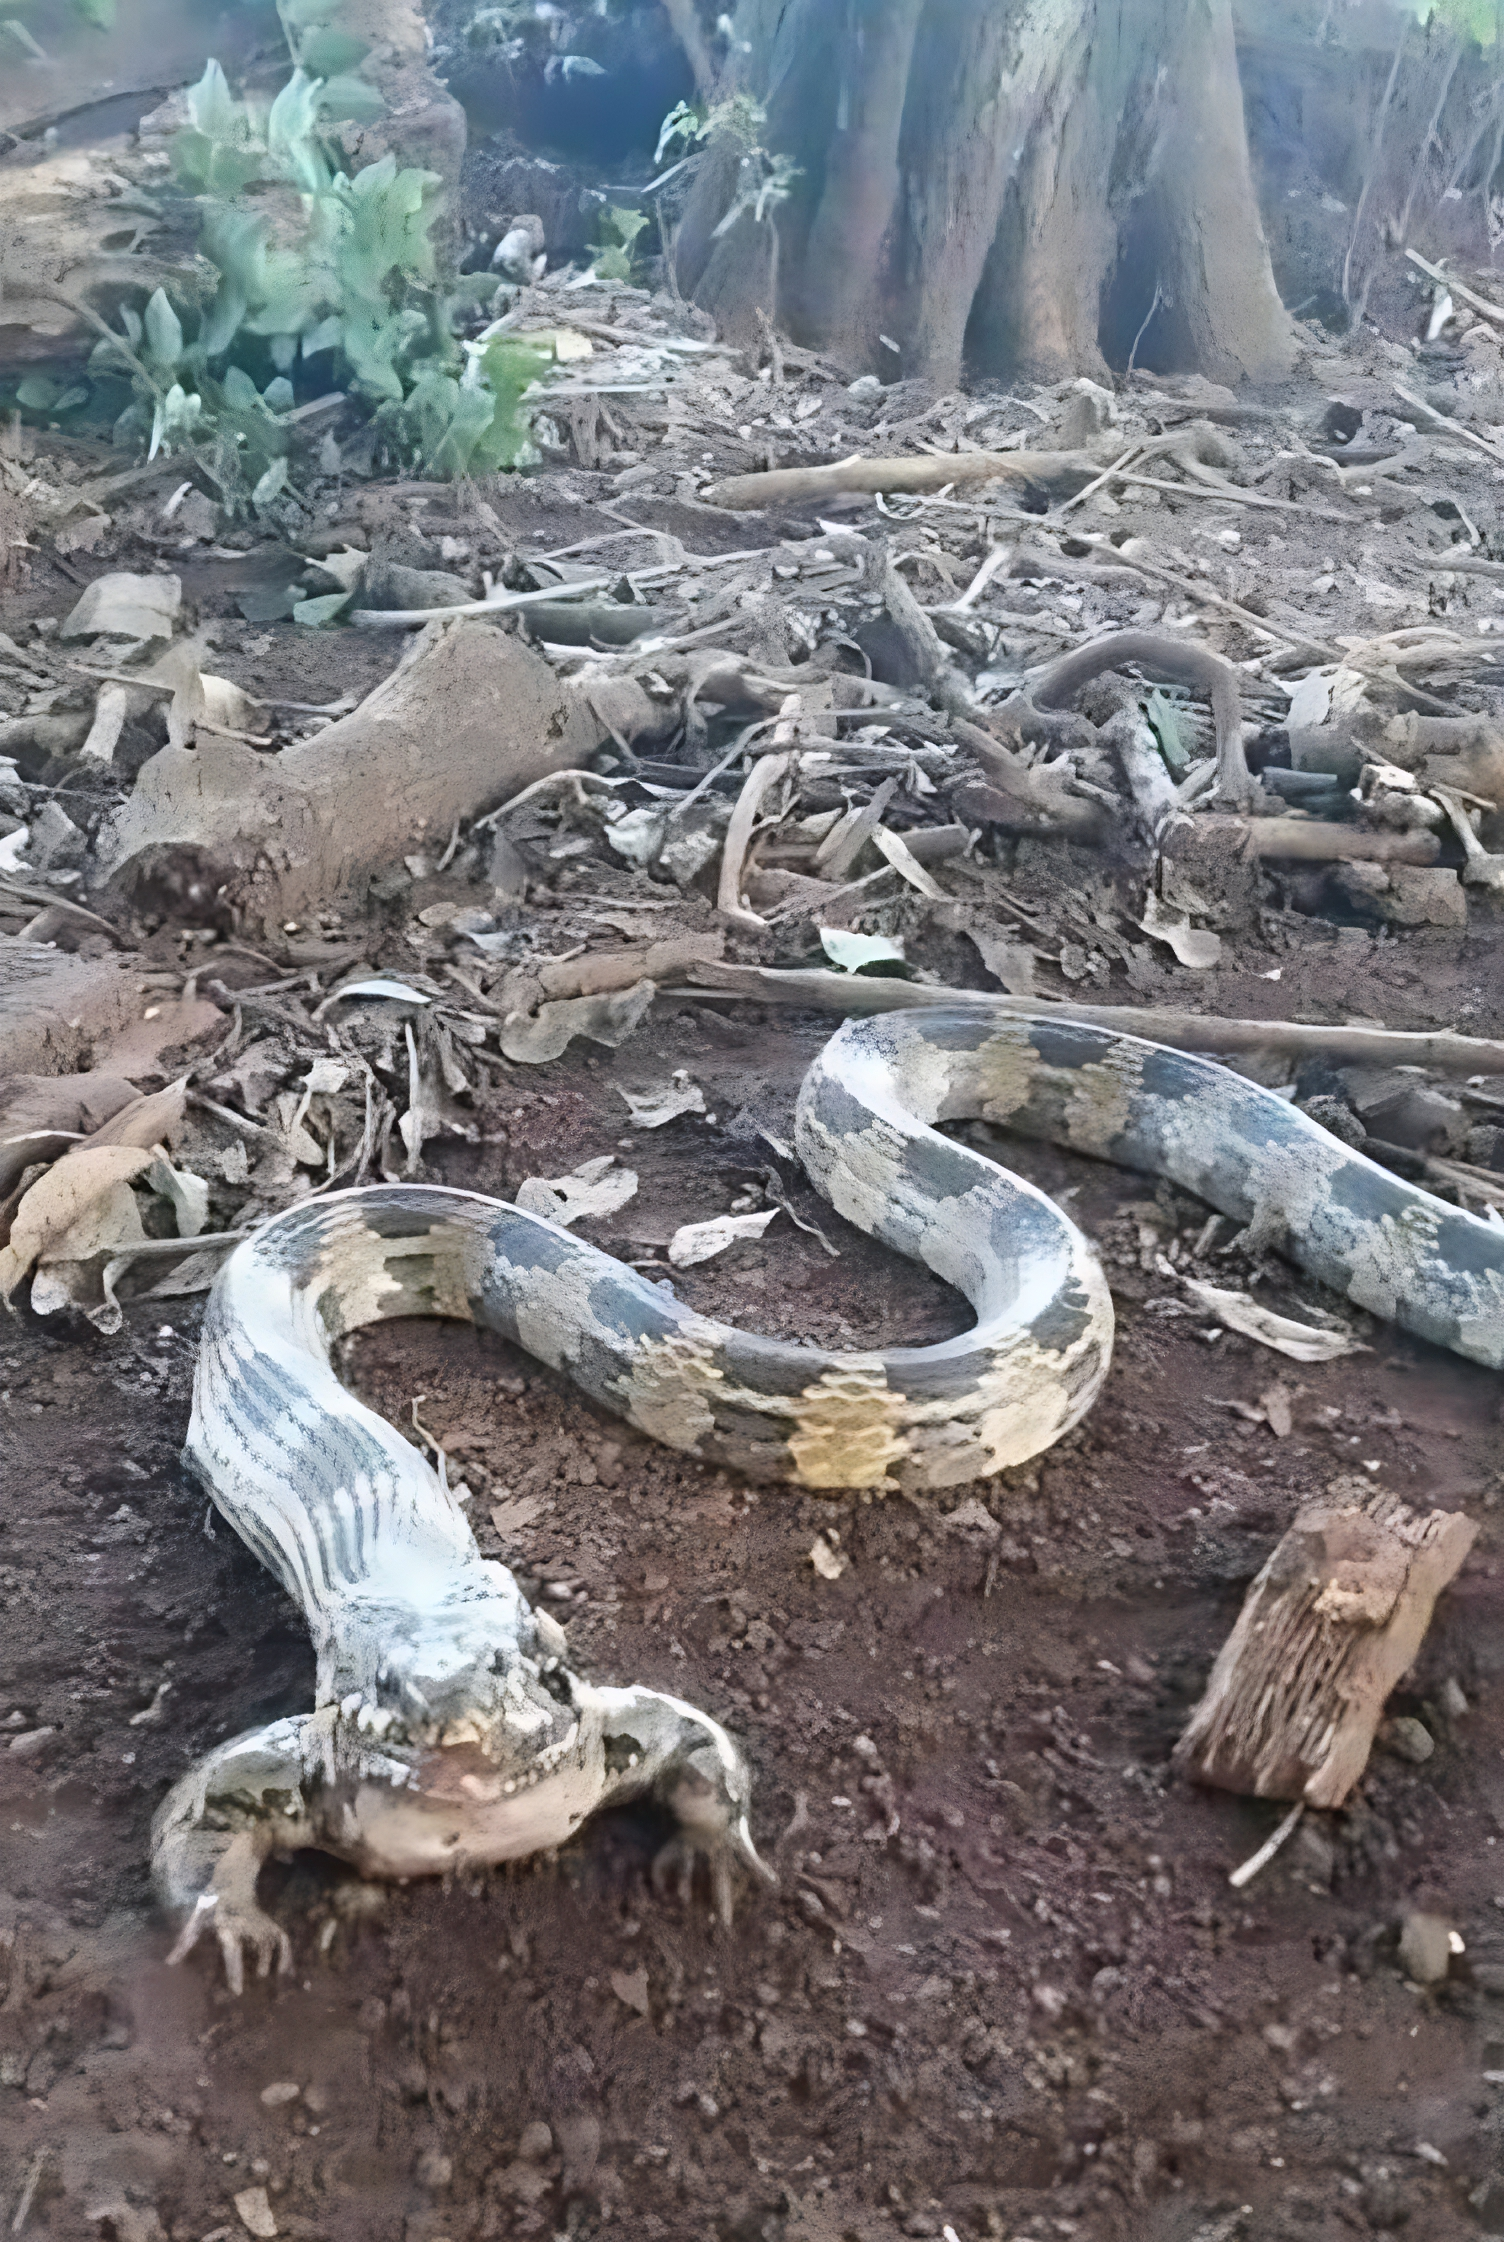 A group of people in Nigeria discovered a snake with an odd form. – AmazingUnitedState.Com